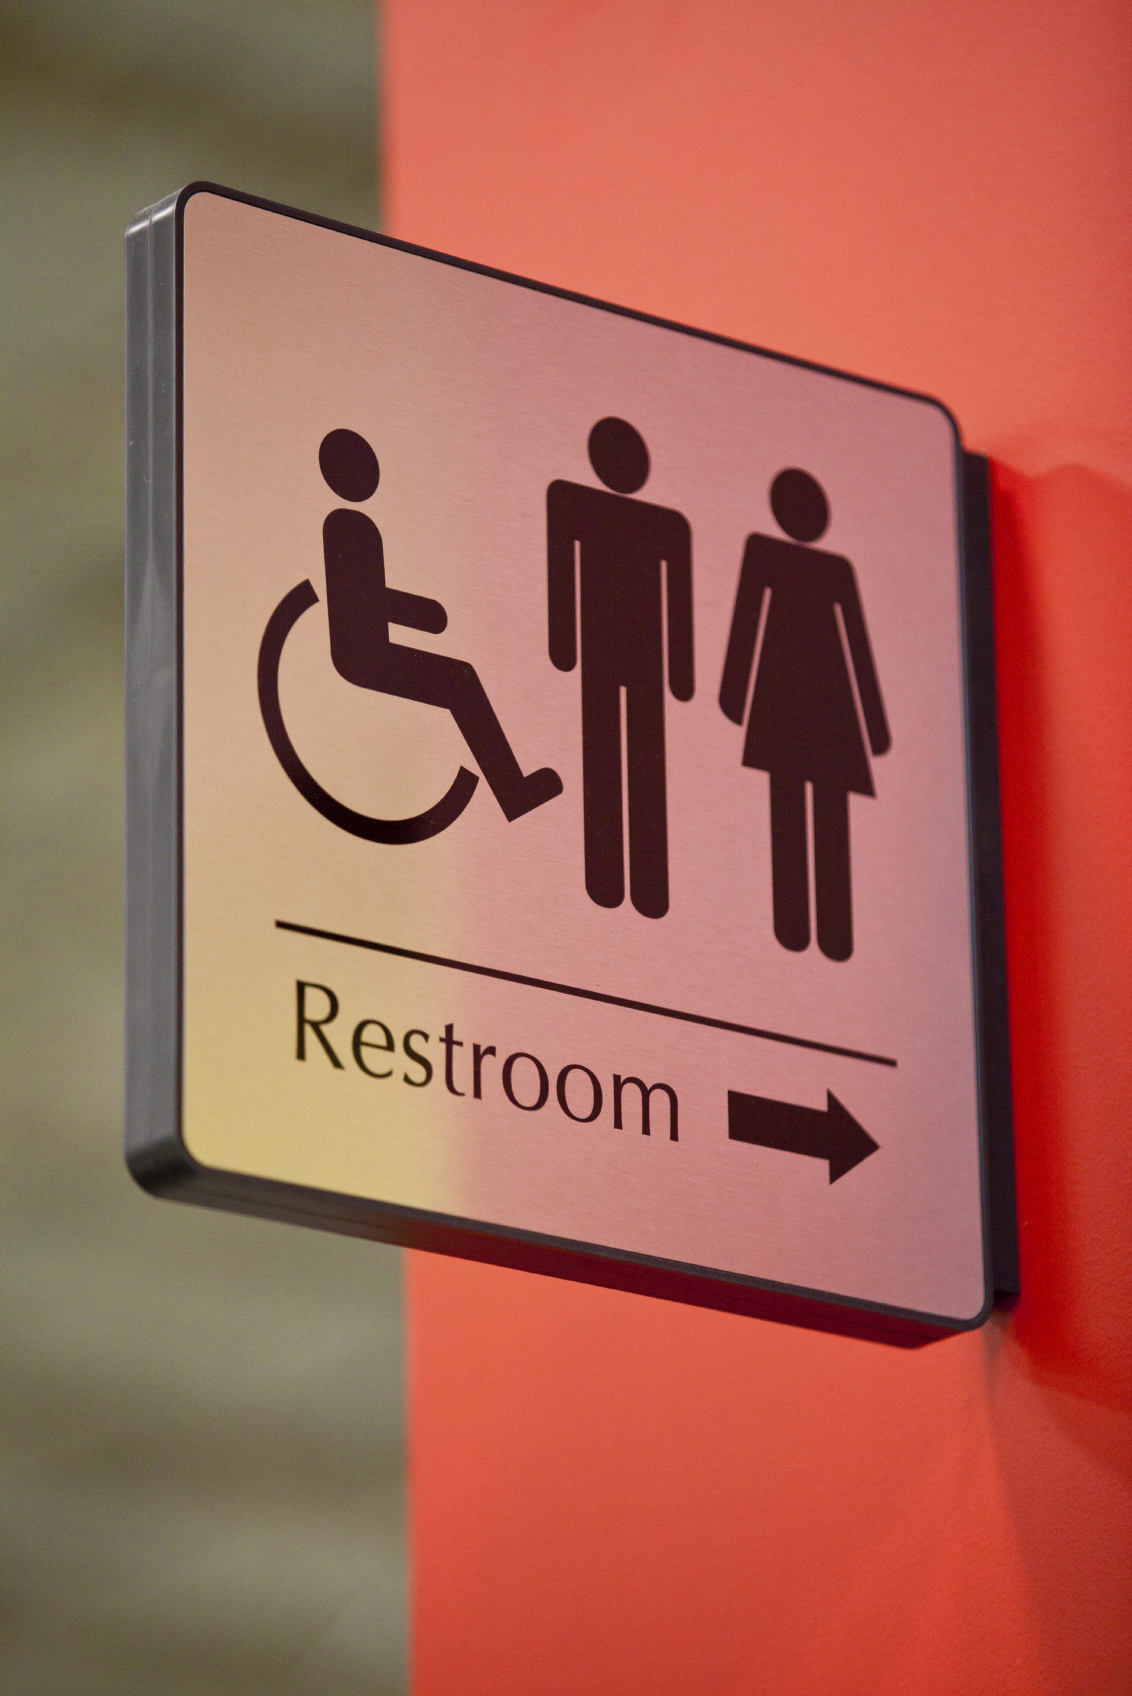 How risky is using a public bathroom during the pandemic? - Harvard Health Blog - Primary Care ...